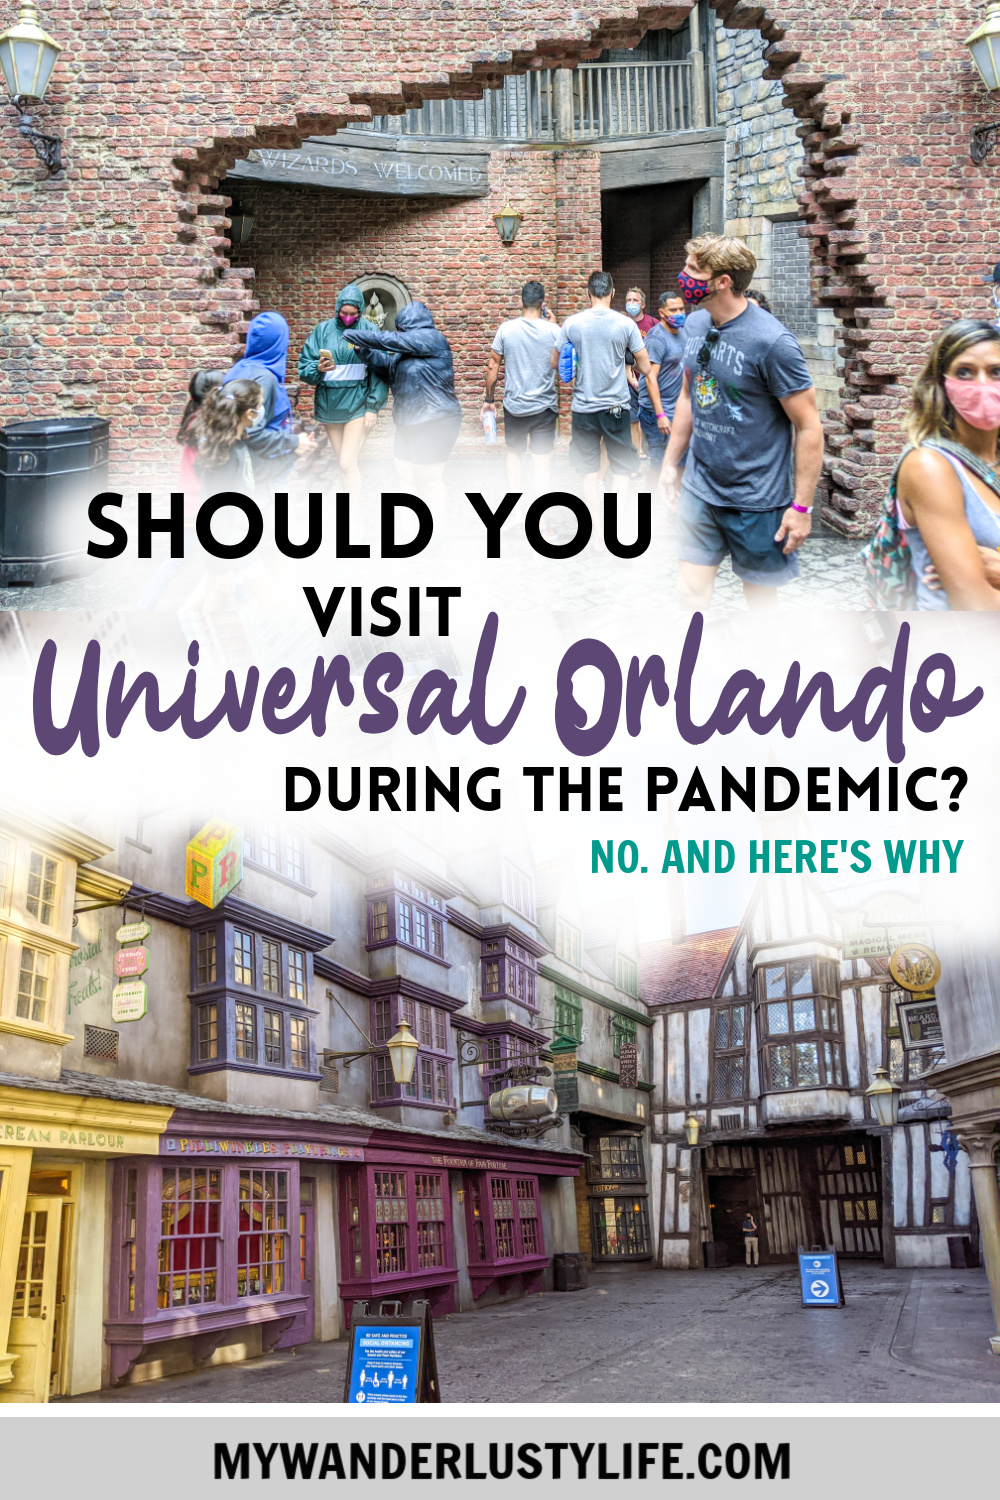 Should You Visit Universal Orlando During the Pandemic? Ehh, Maybe Not | Universal Studios, Orlando, Florida - Islands of Adventure, Wizarding World of Harry Potter | #mywanderlustylife #harrypotter #universalstudios #orlando #universalorlando #travelin2020 #pandemictravel